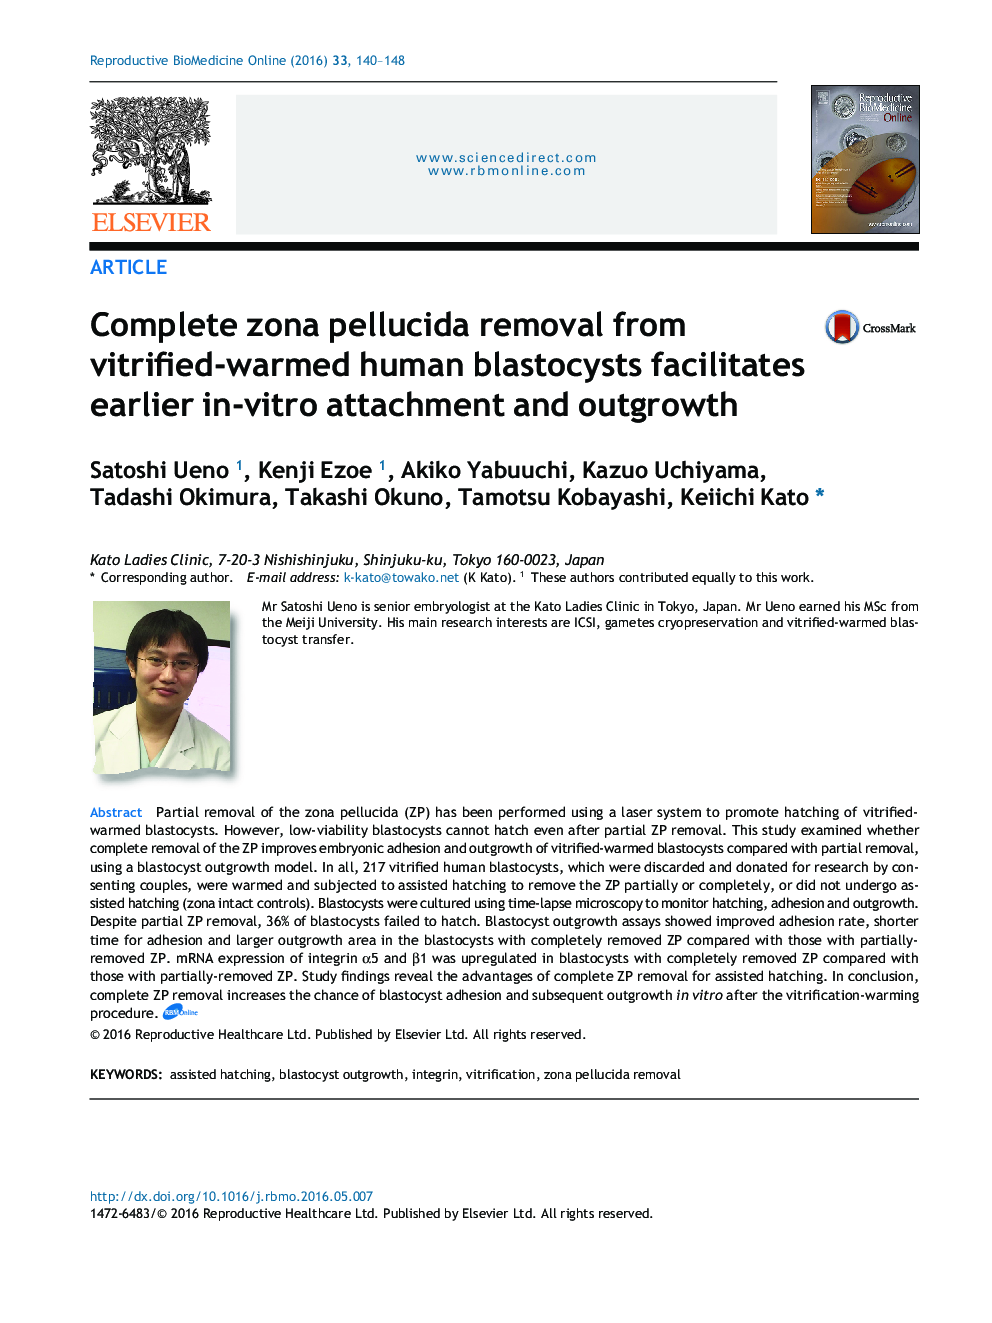 ArticleComplete zona pellucida removal from vitrified-warmed human blastocysts facilitates earlier in-vitro attachment and outgrowth